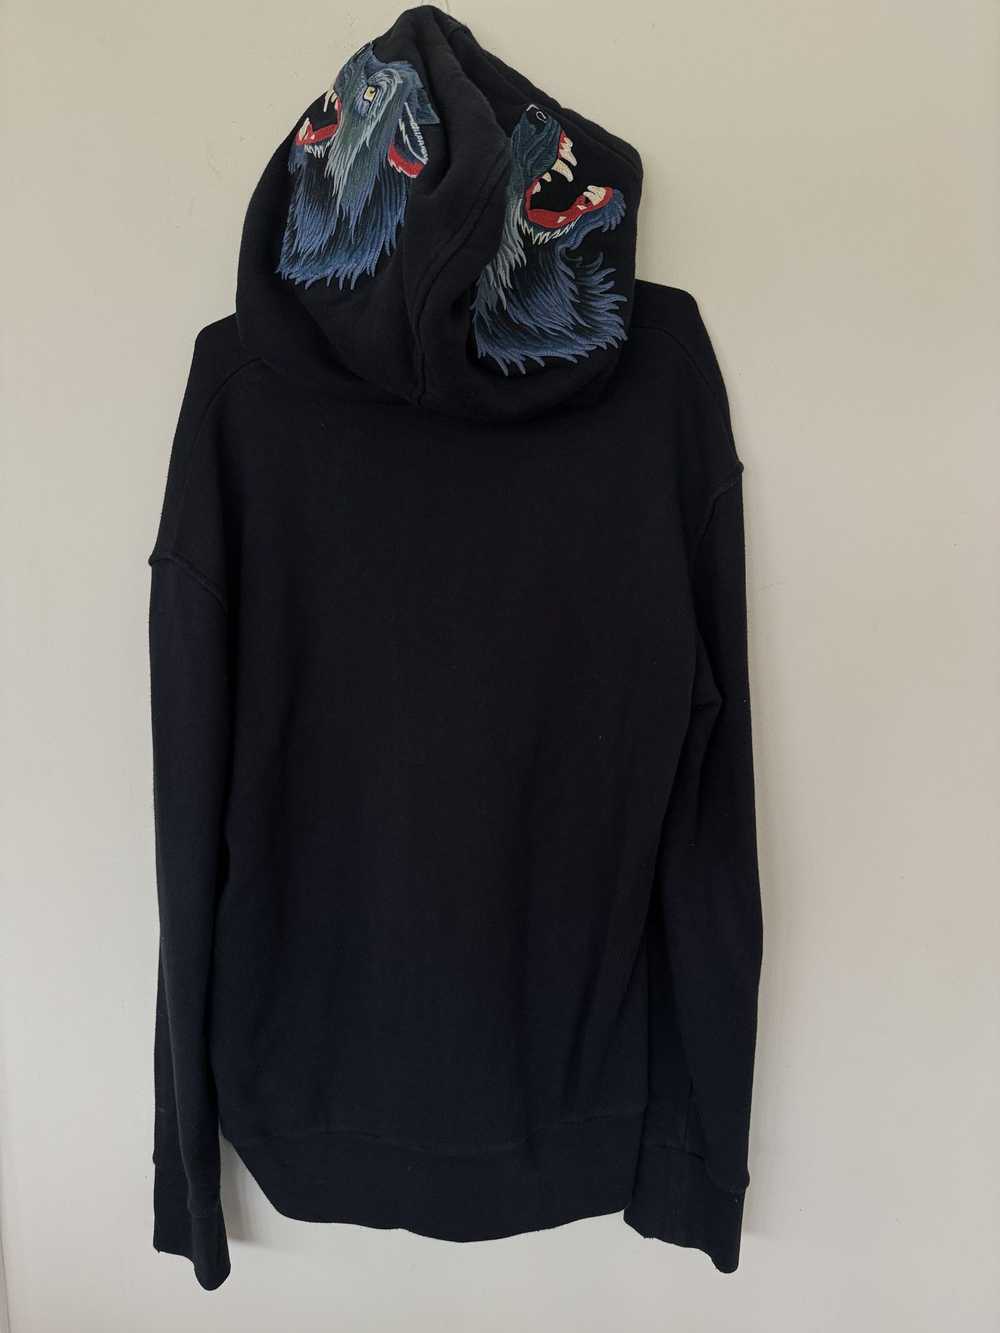 Gucci Glitter Gucci Embrodiered Wolf Hoodie - image 8